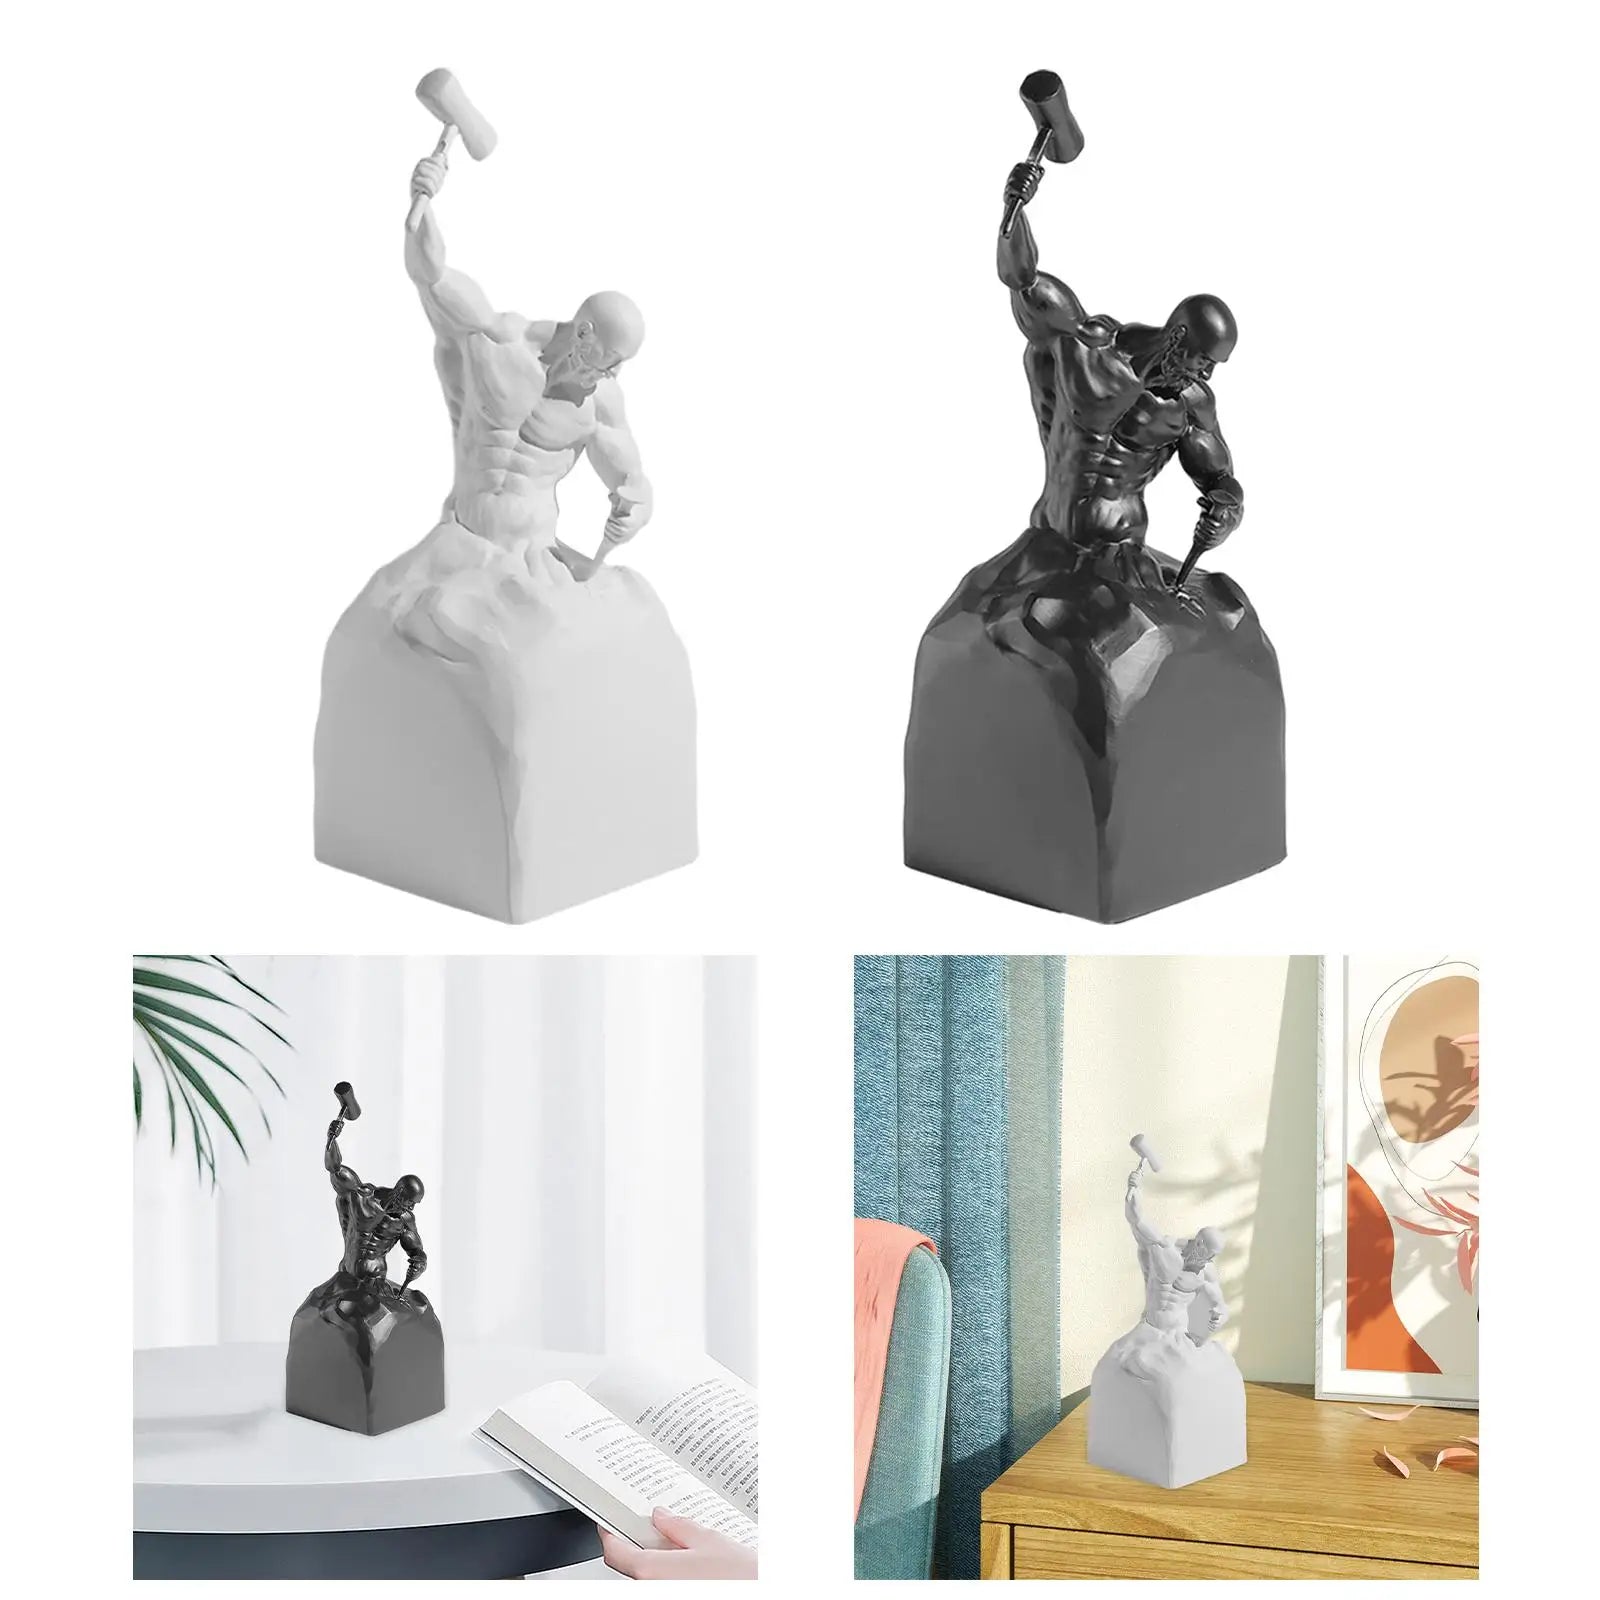 Collectible Figurine Modern Office Art Figure for Study Room Table Decorations Bookshelf Decorative Objects Home Decor Bedroom